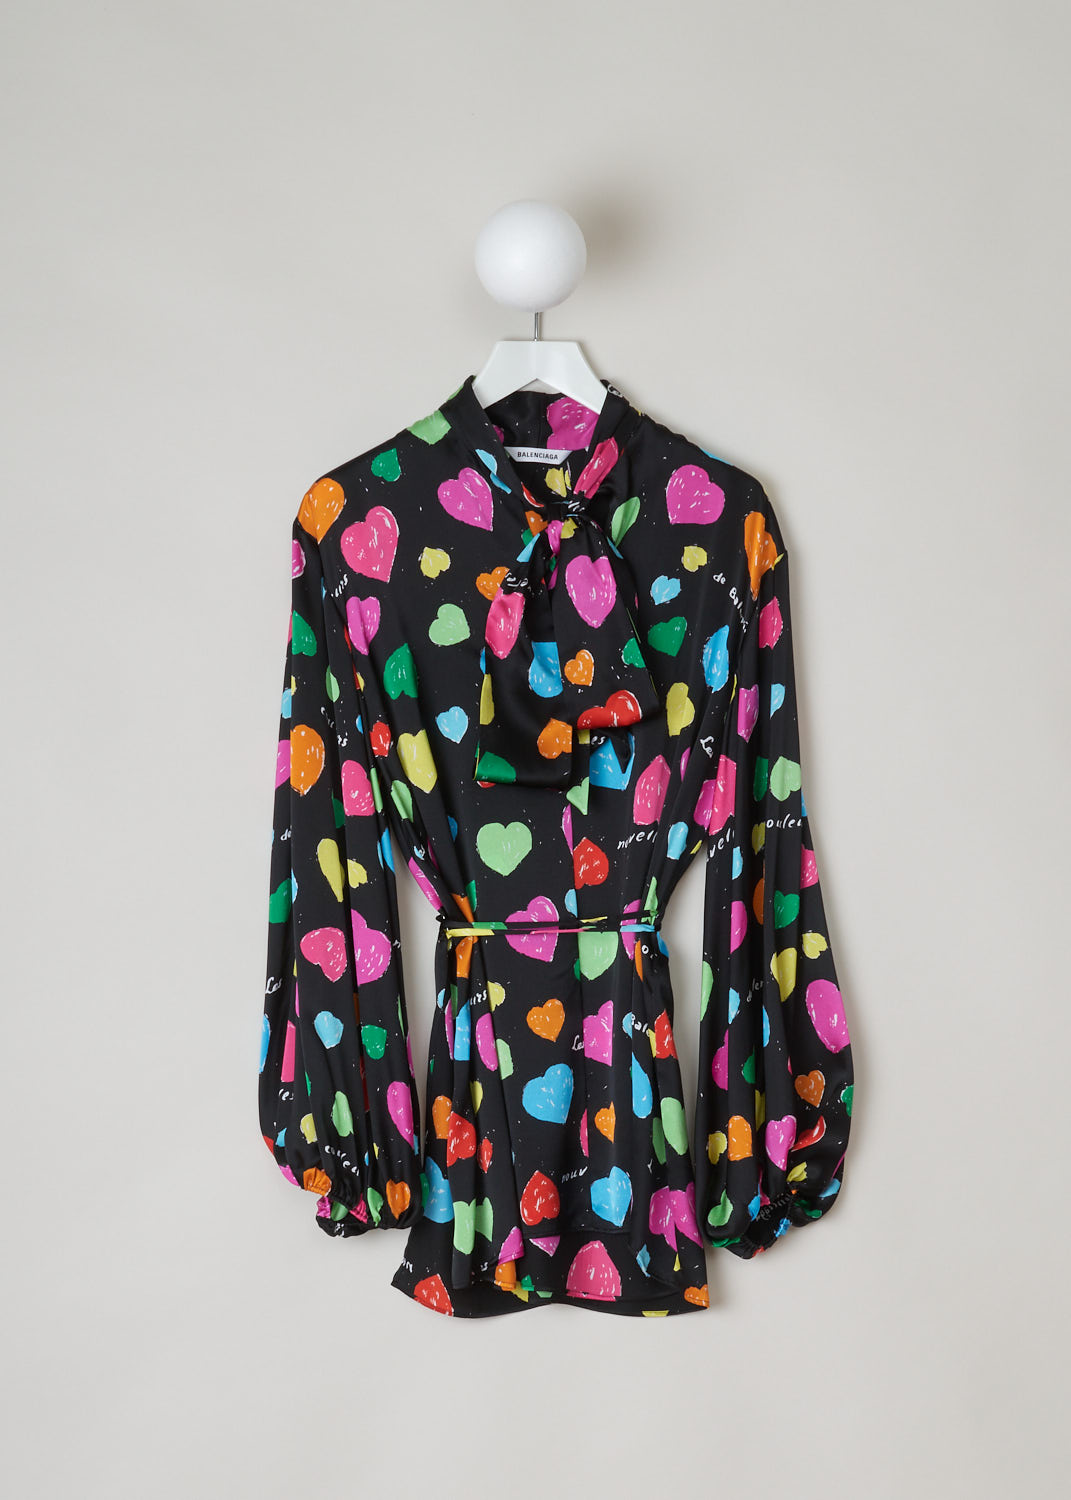 Balenciaga, Archive hearts print blouse, WL0_659088_TKL08_1000, black, pink, green, yellow, blue, print, front, This blouse features an archive hearts and text print which stands out against the black silk background. It has a self tie collar and a belted waist. The blouse also has long sleeves with elasticated cuffs. 
